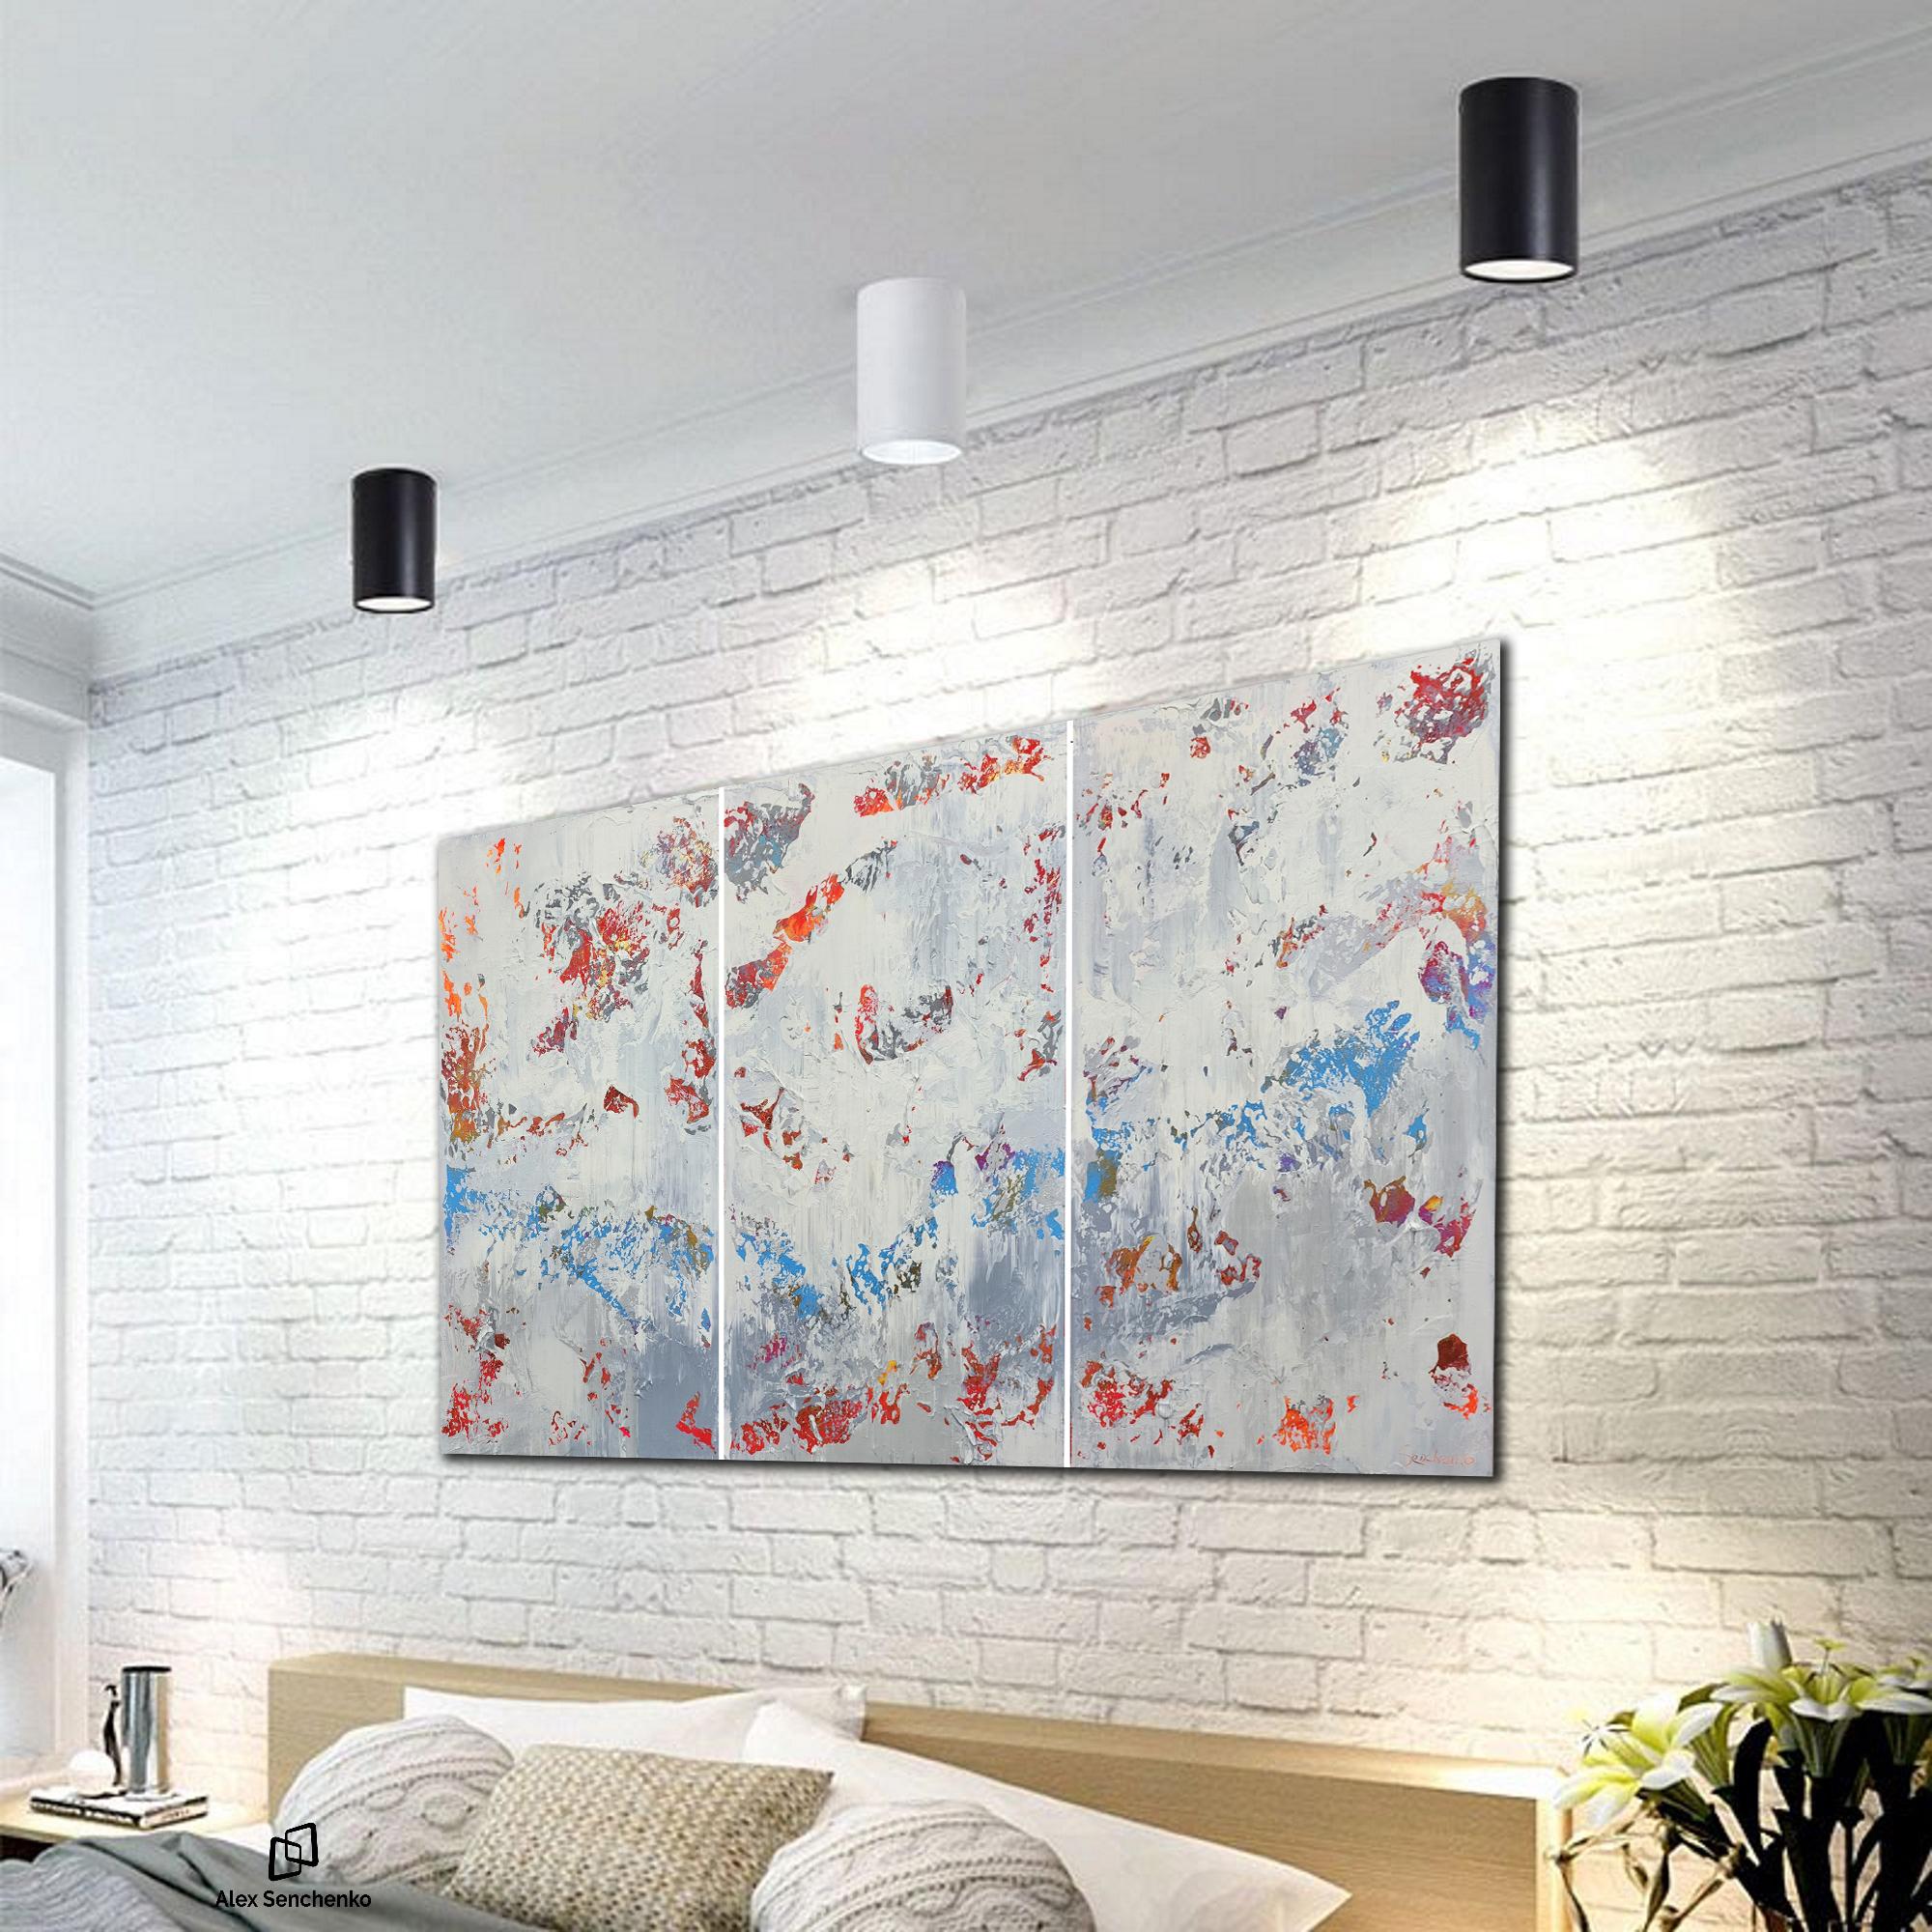 There’s something ethereal, almost magical, about contemporary paintings. The
incredible Expressionism bleeds through the canvas, transforming any room into an
entirely new experience. Alex Senchenko’s ,, Abstract 22157 ,, painting will give your